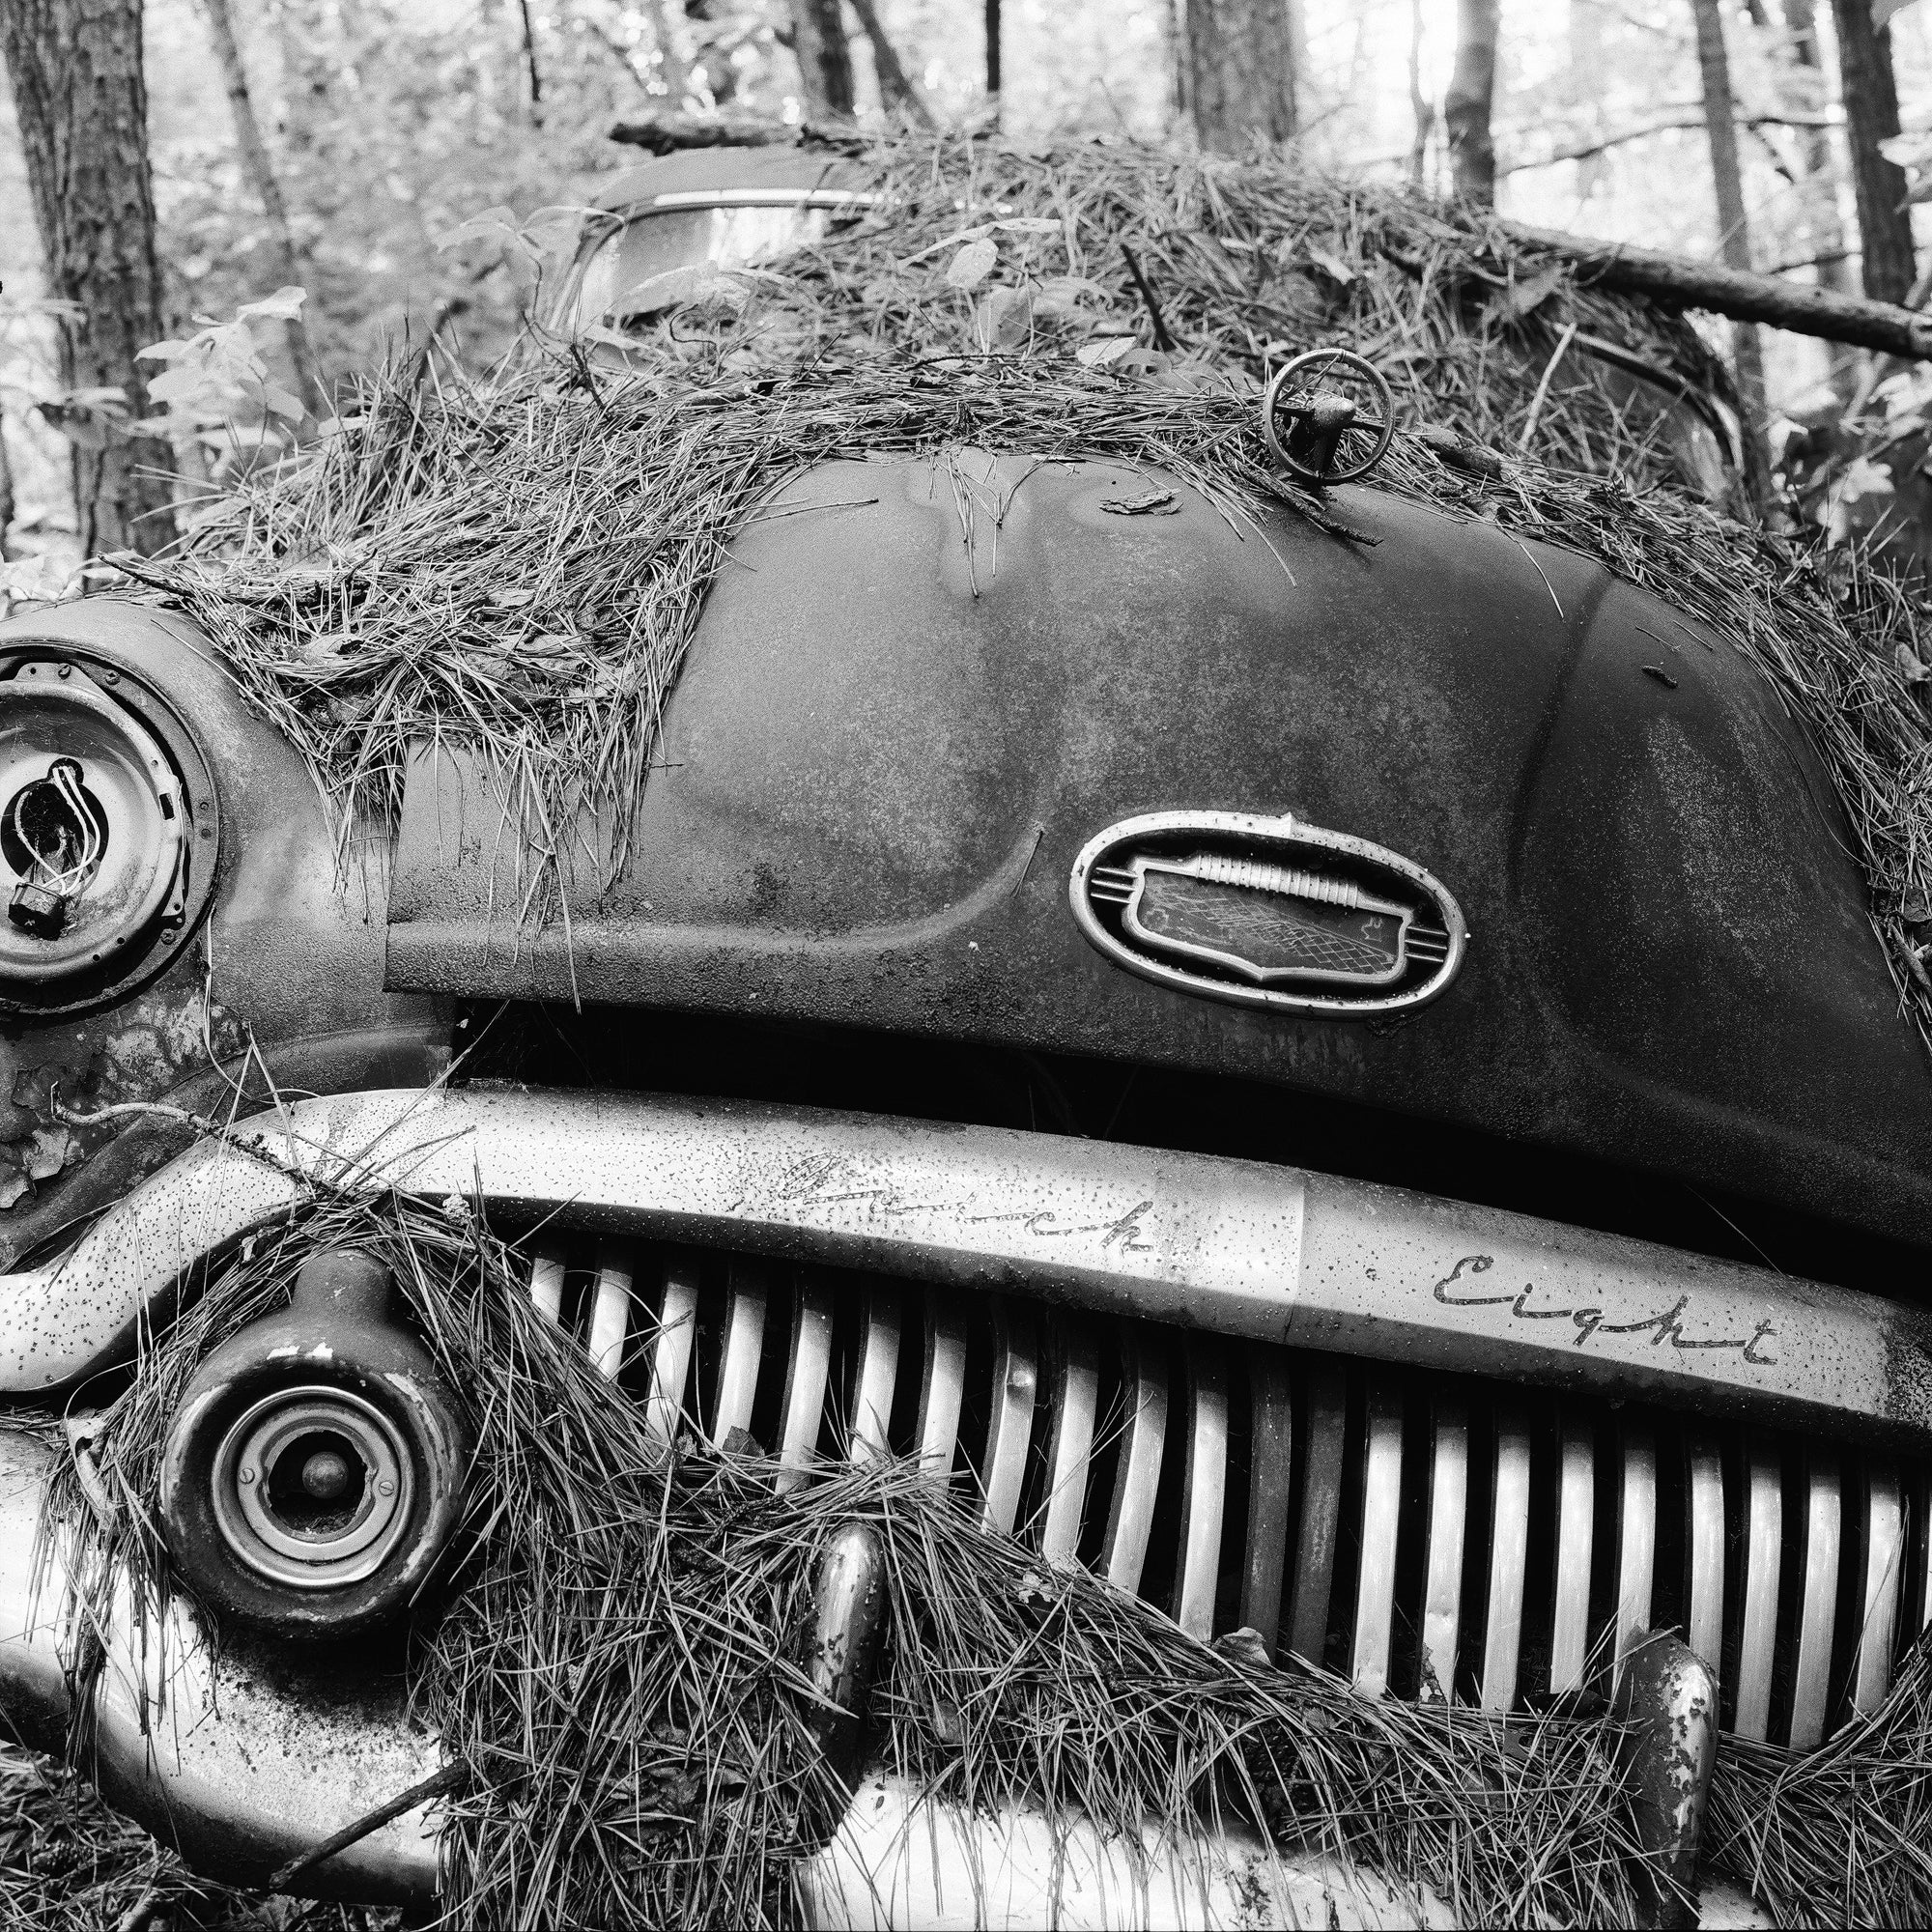 Junked Buick Super Eight Circa 1951 - Black and White Photograph by Keith Dotson. Buy a fine art print.